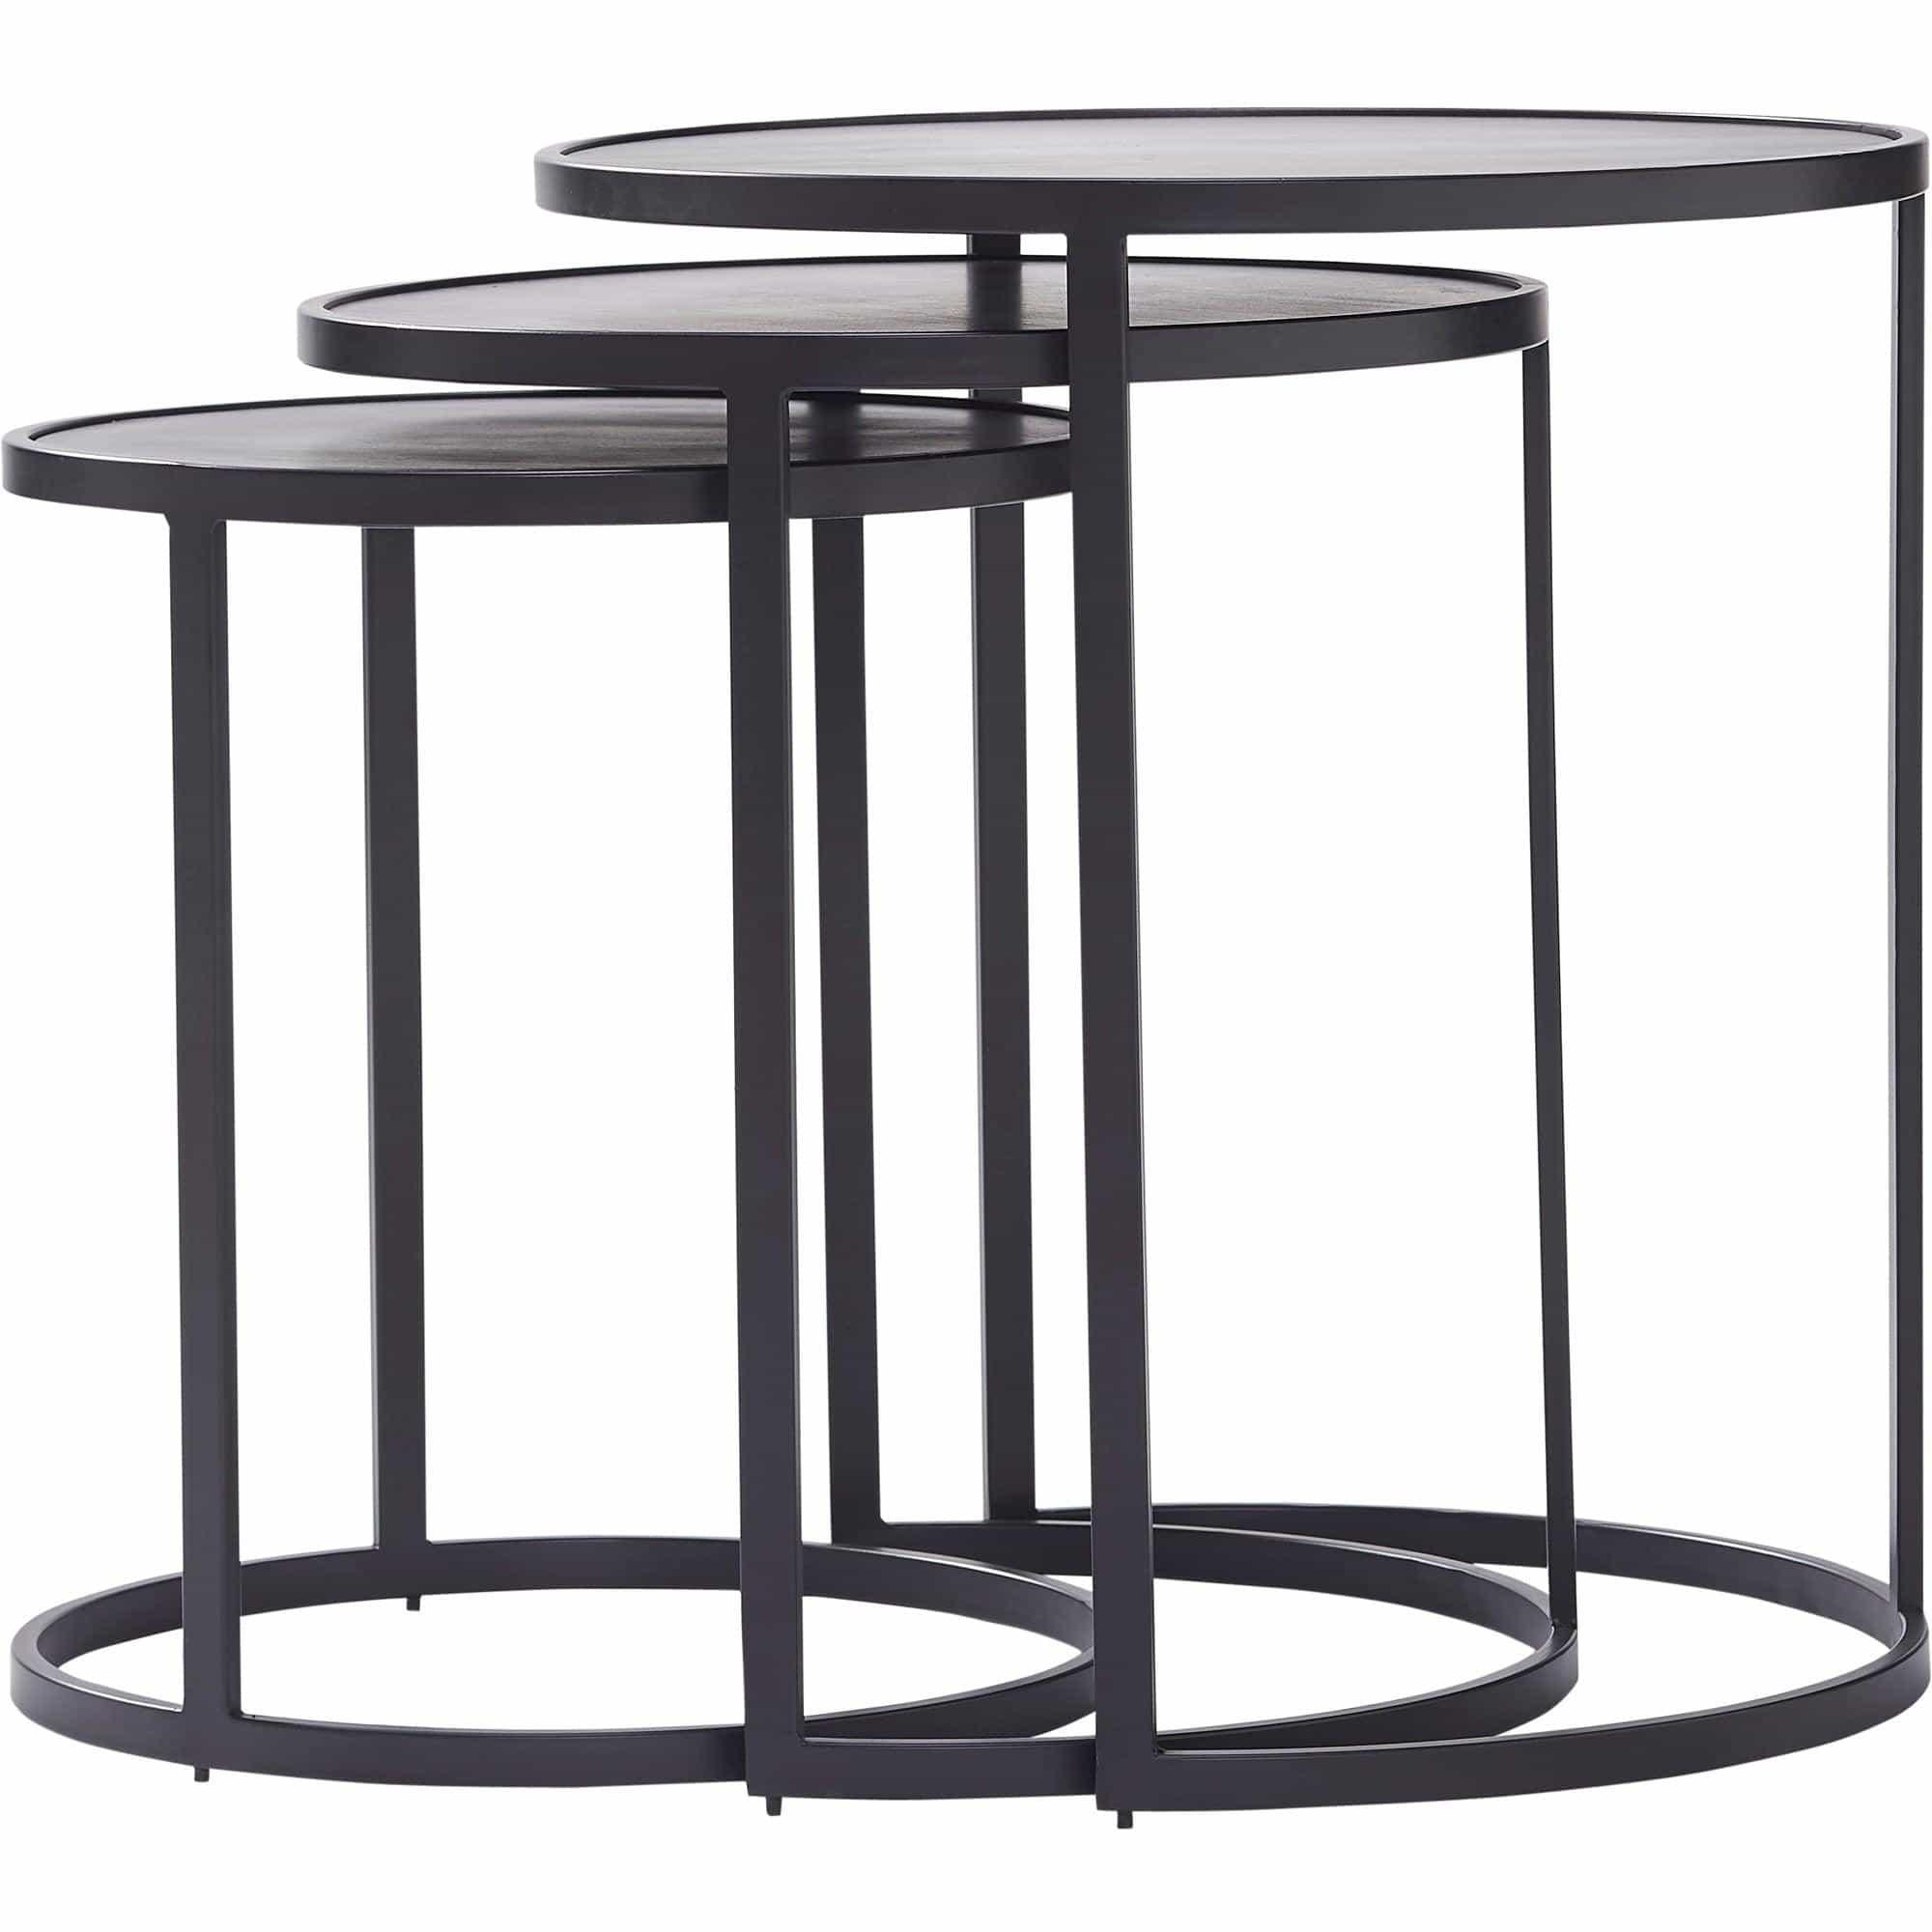 Renwil - Donatella Set of 3 Nested Tables - TA429 | Montreal Lighting & Hardware